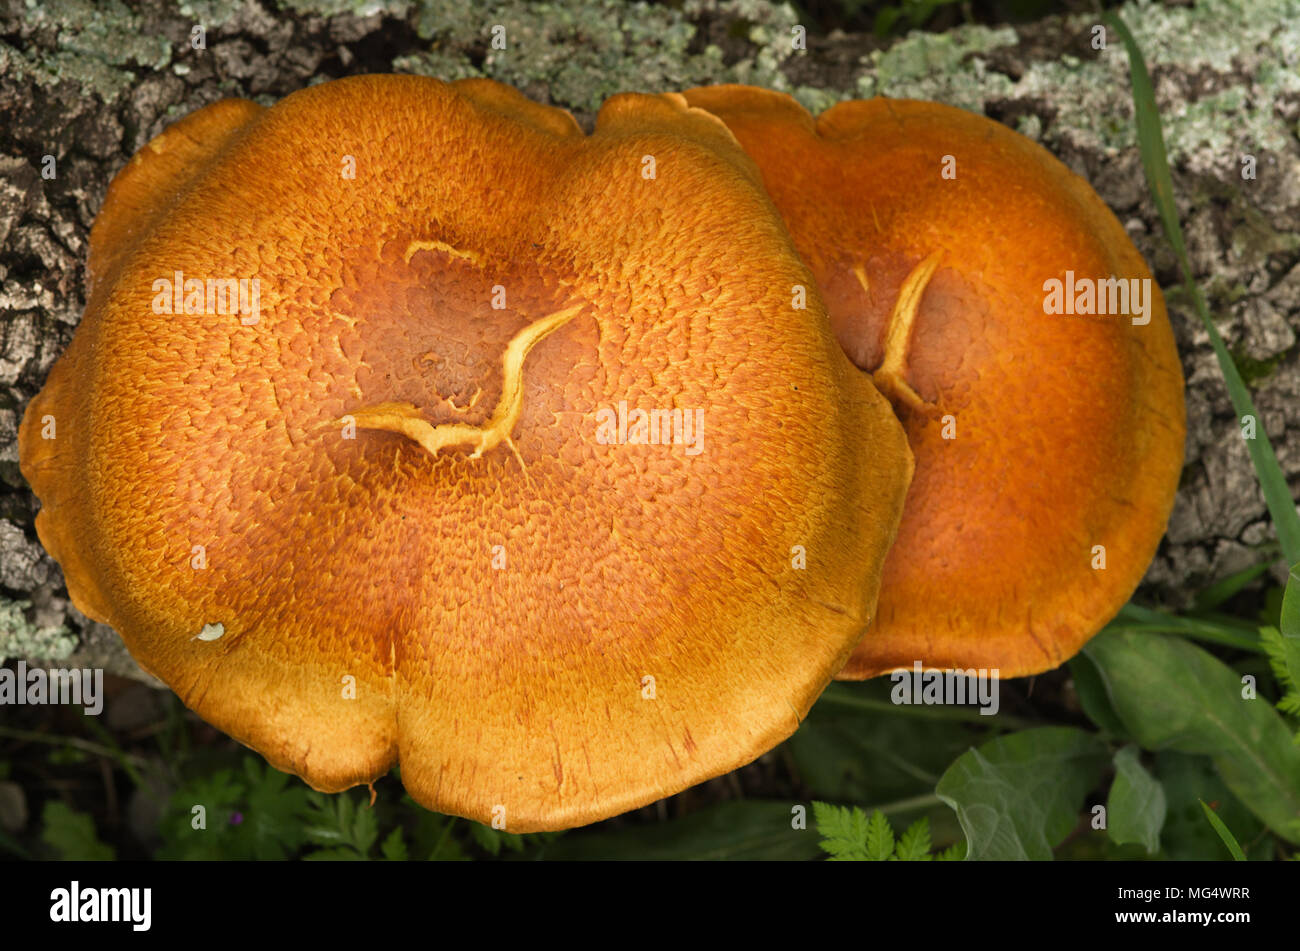 Overview of two large golden mushrooms (Gymnopilus suberis) growing on the crevices of a dead cork tree log. Arrabida mountains, Portugal. Stock Photo